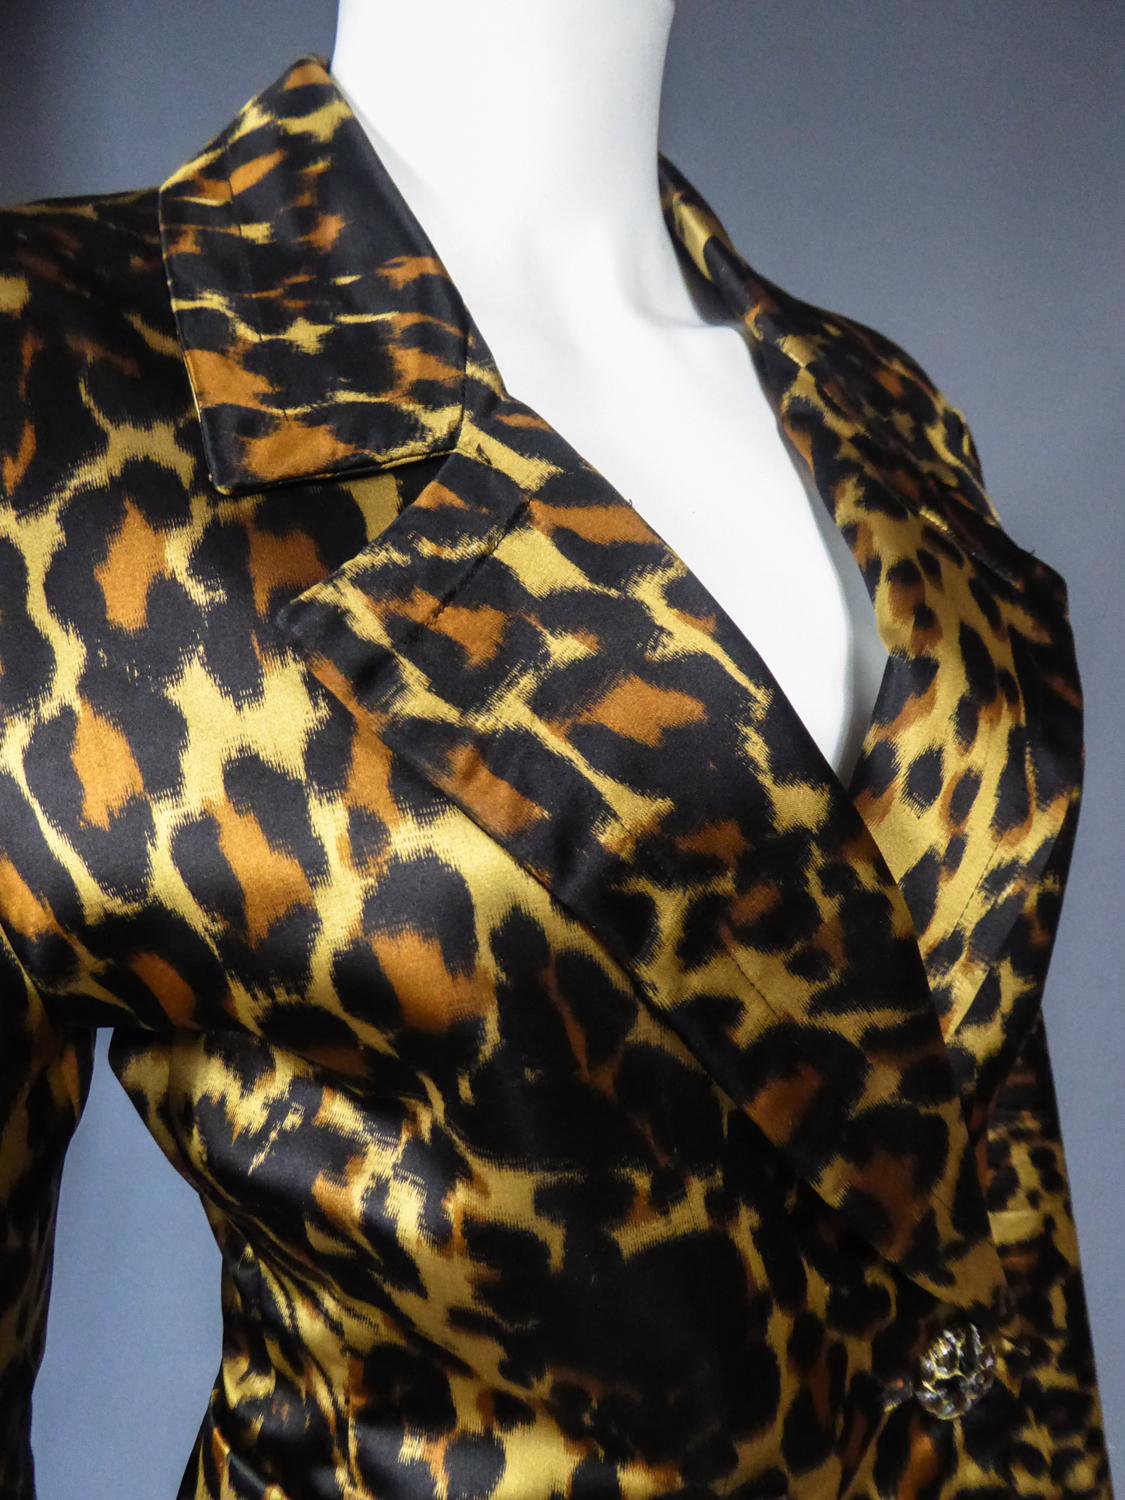 Yves Saint Laurent Printed Panther Satin (attributed to) Skirt Suit Circa 1990 For Sale 6